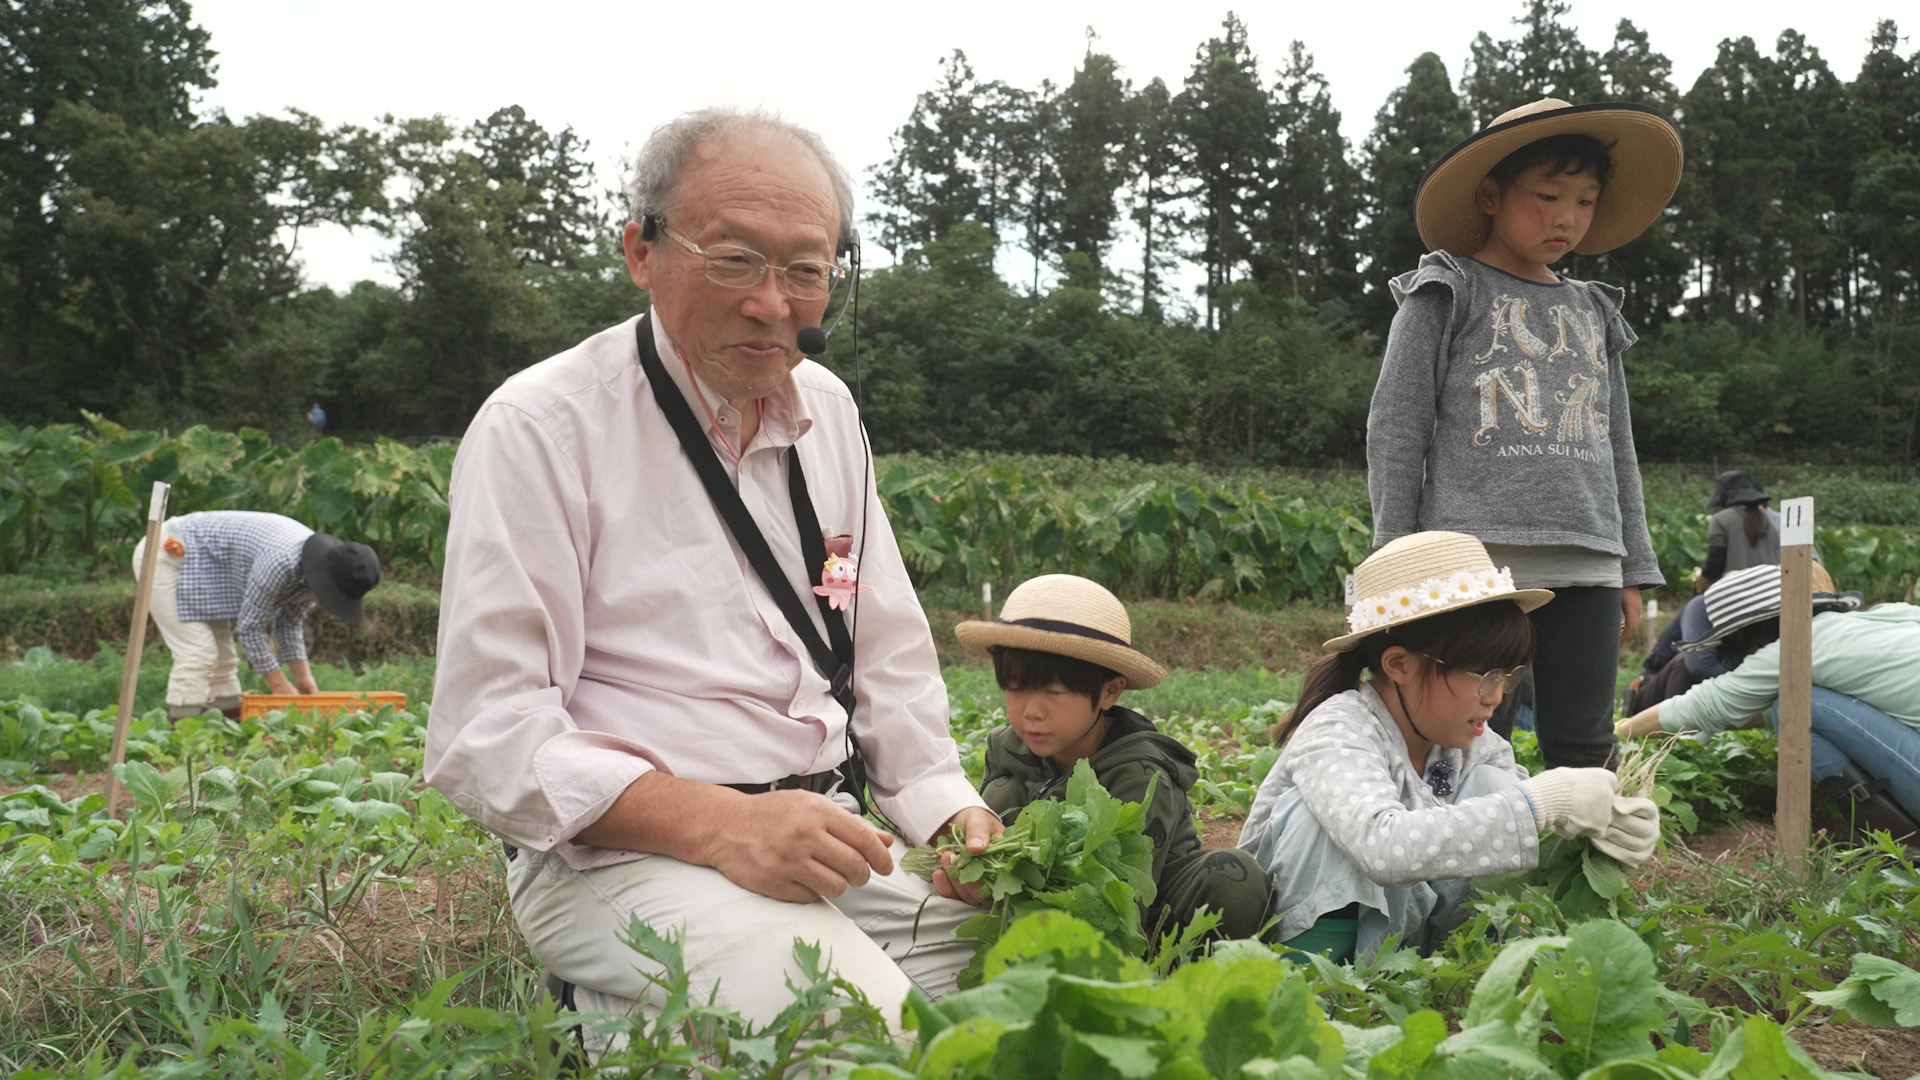 Elder man and young children in a field of crops.